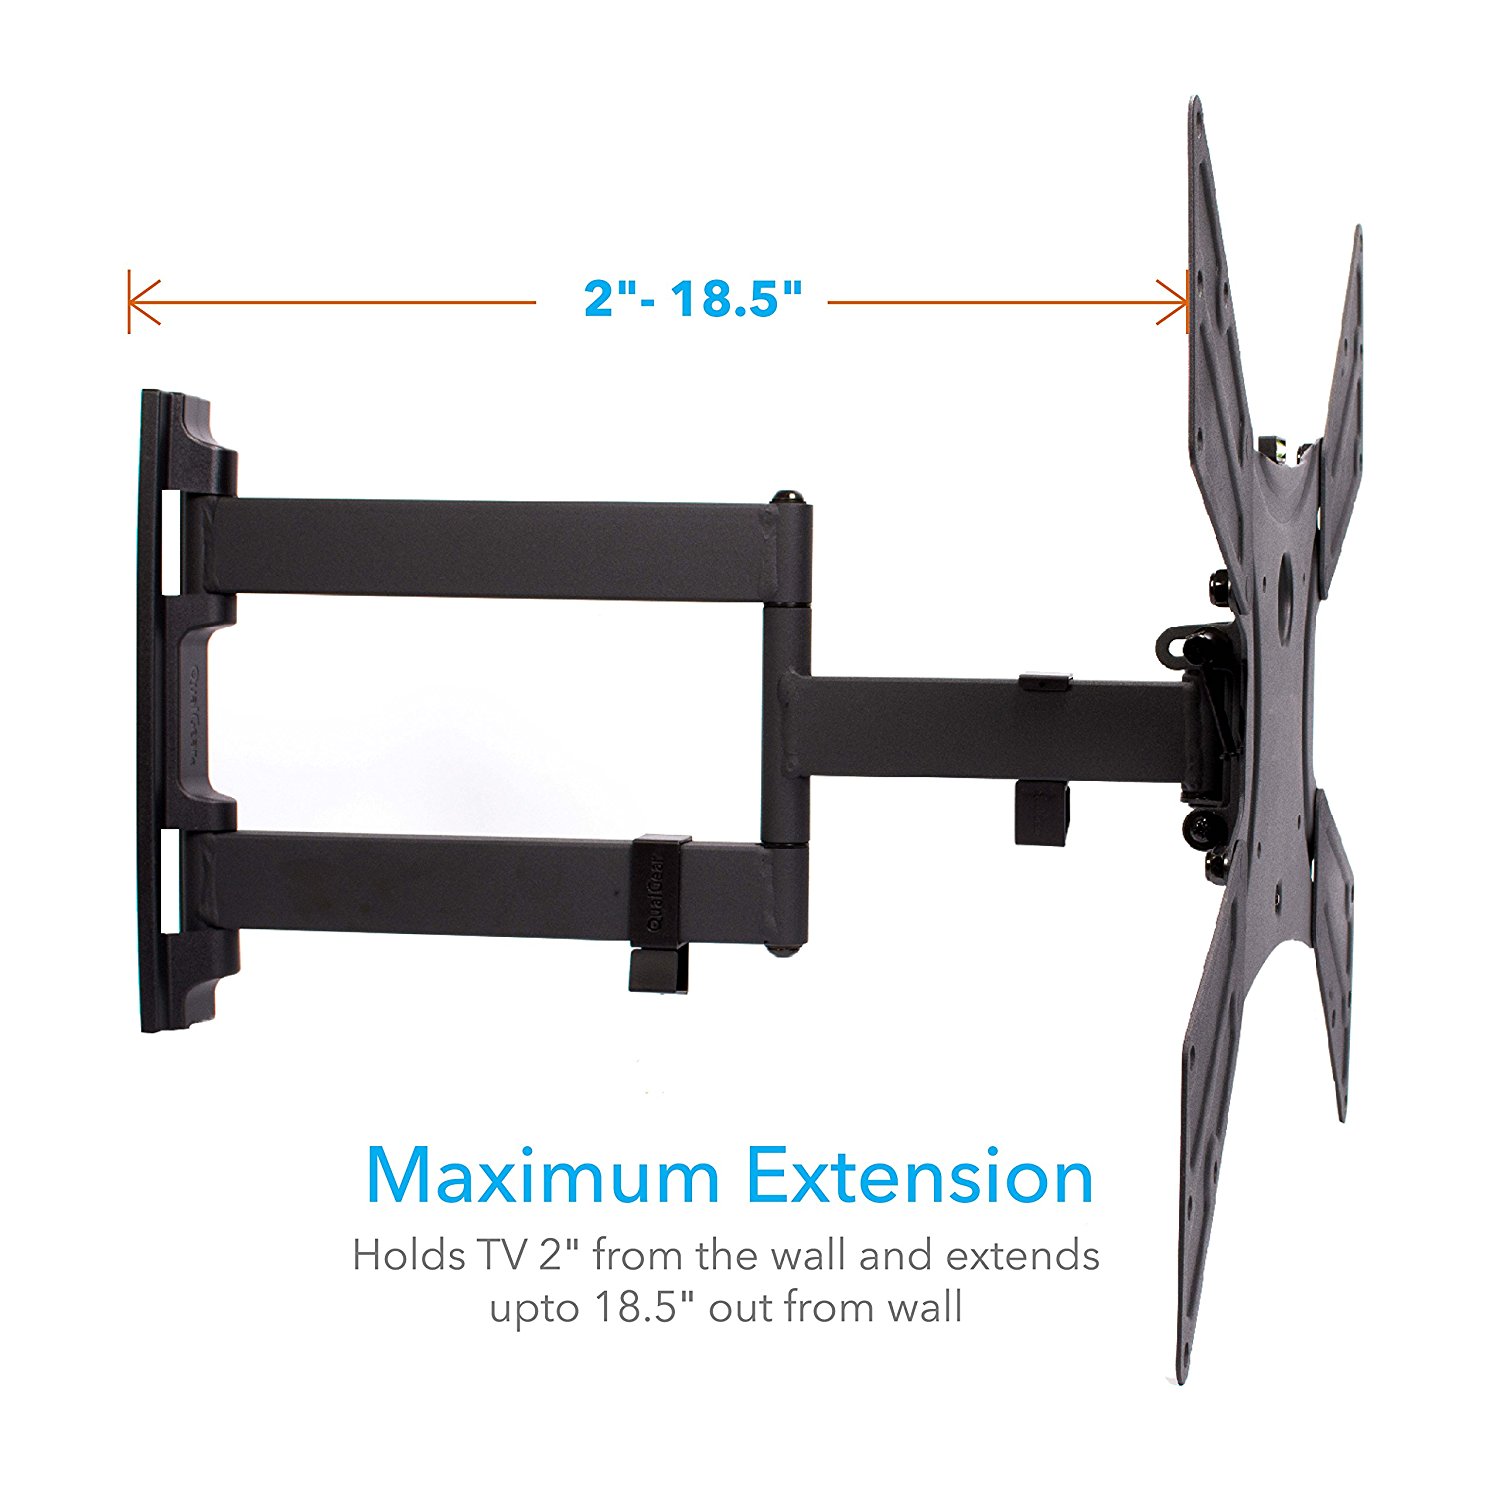 QualGear QG-TM-021-BLK Universal Ultra Slim Low Profile Articulating TV Wall Mount Kit for most 23-inch to 47-inch and some 55-inch LED TVs, w/ HDMI v2.0 Cable 6 ft